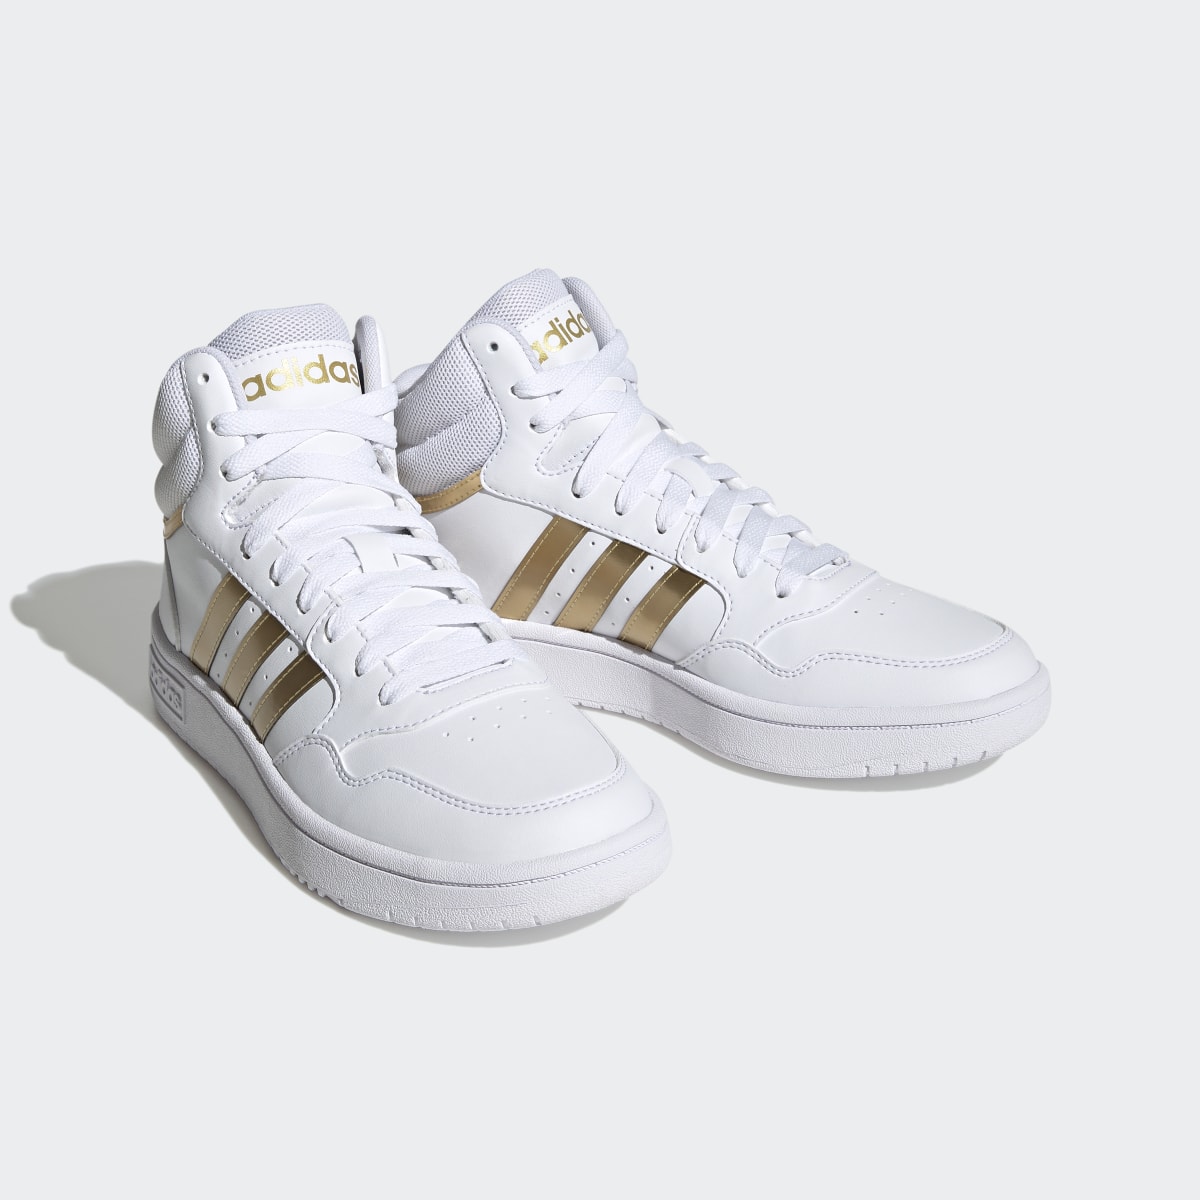 Adidas Hoops 3.0 Mid Lifestyle Basketball Classic Shoes. 5